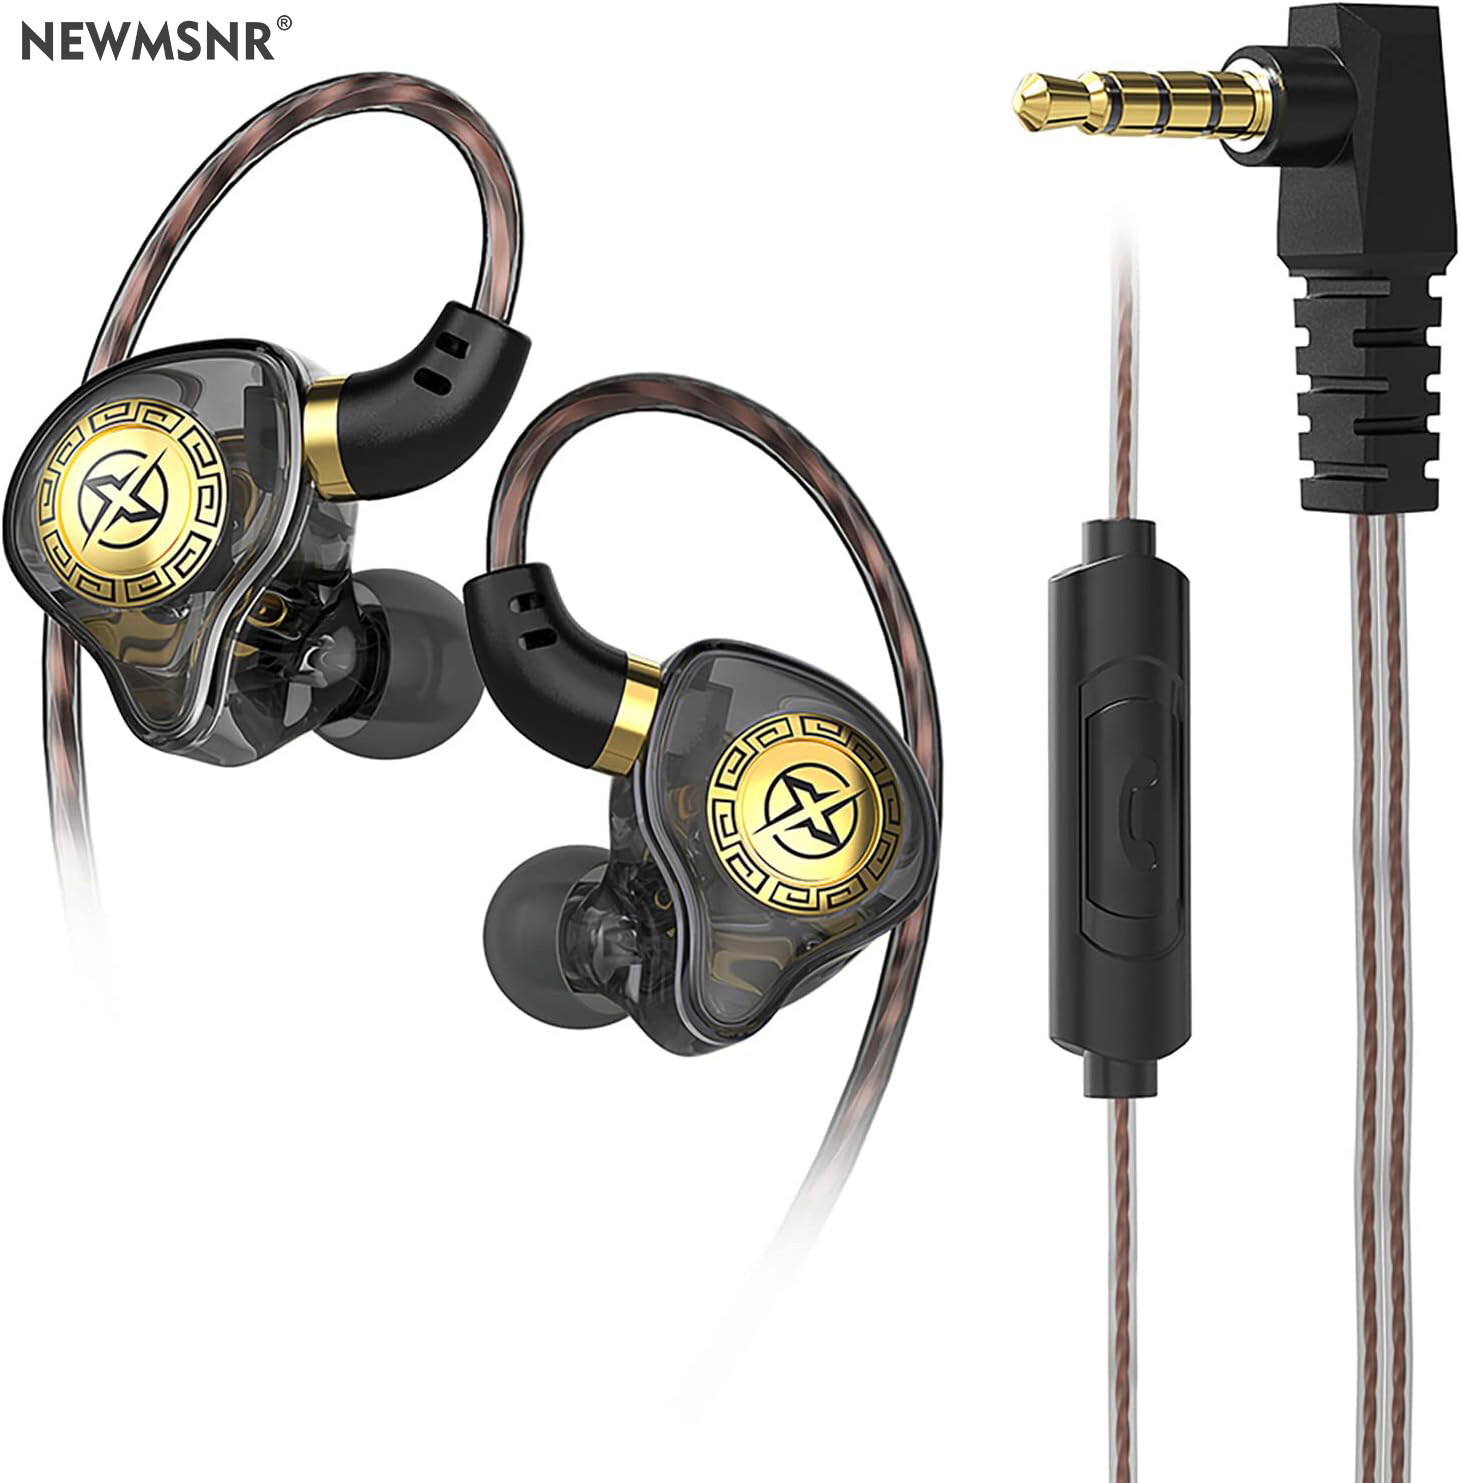 Newmsnr 11mm Moving Coil Unit Earphones With Mic 9D Super Bass In Ear